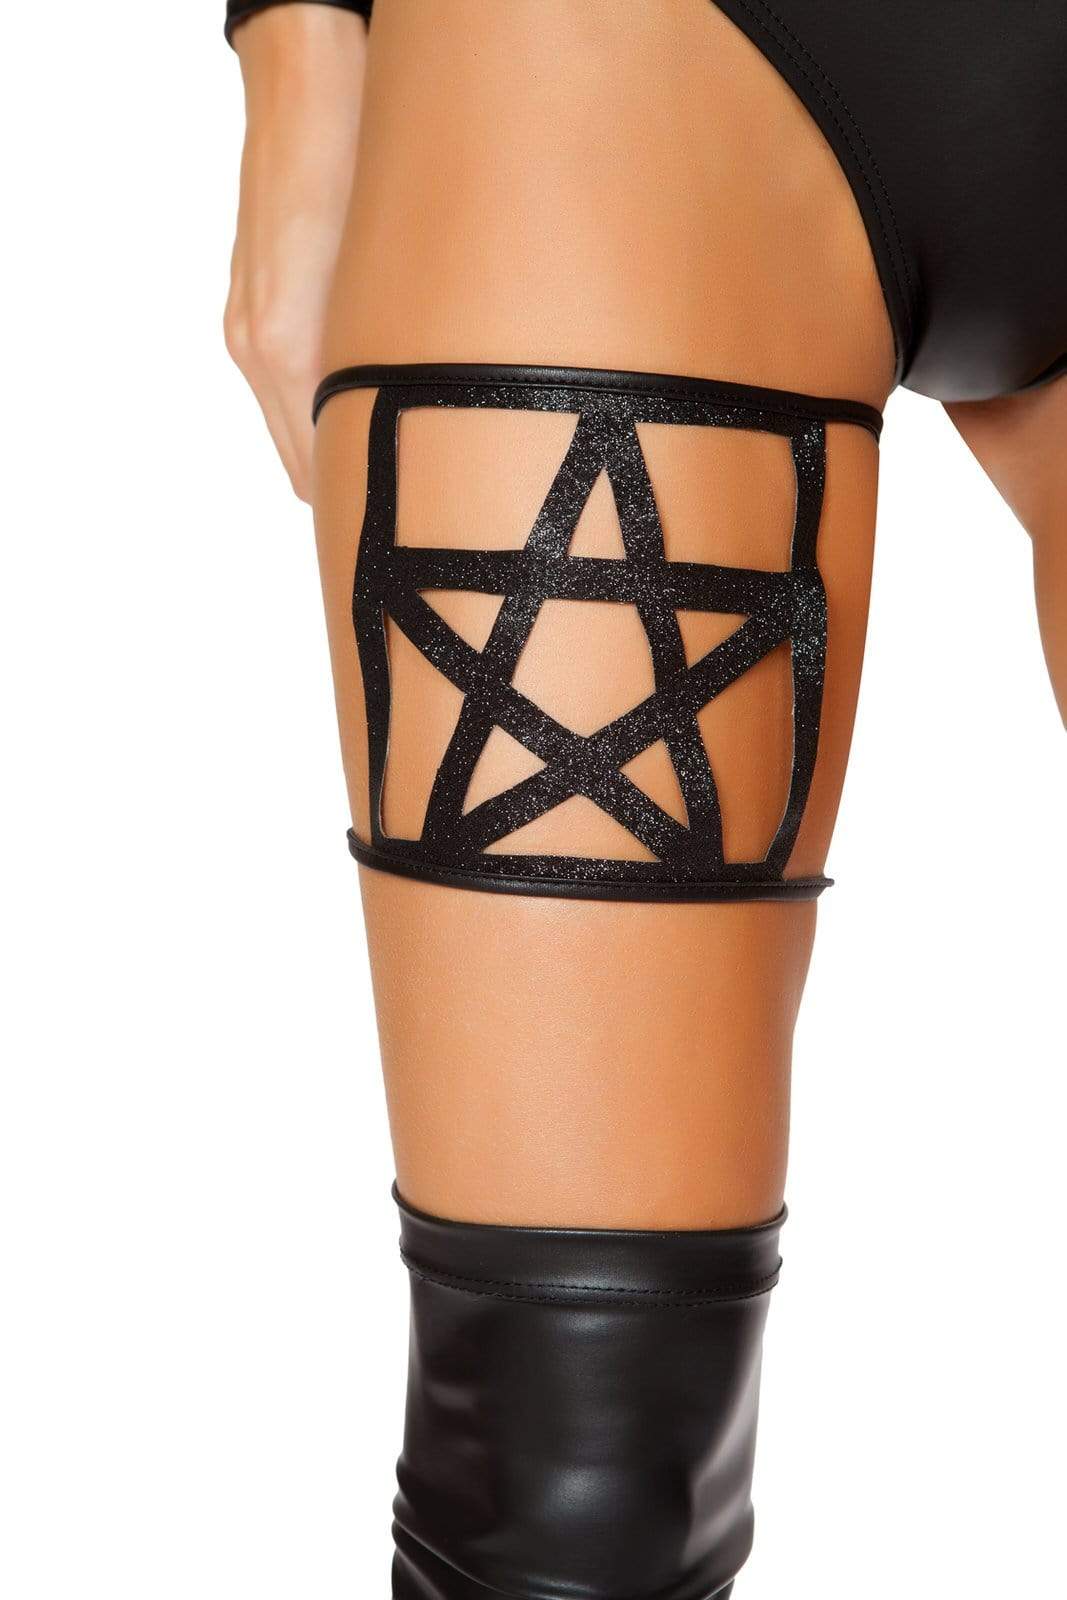 Roma ONE SIZE GLITTERING PENTAGRAM STAR THIGH STRAP SHC-4795-R Apparel & Accessories > Costumes & Accessories > Costumes